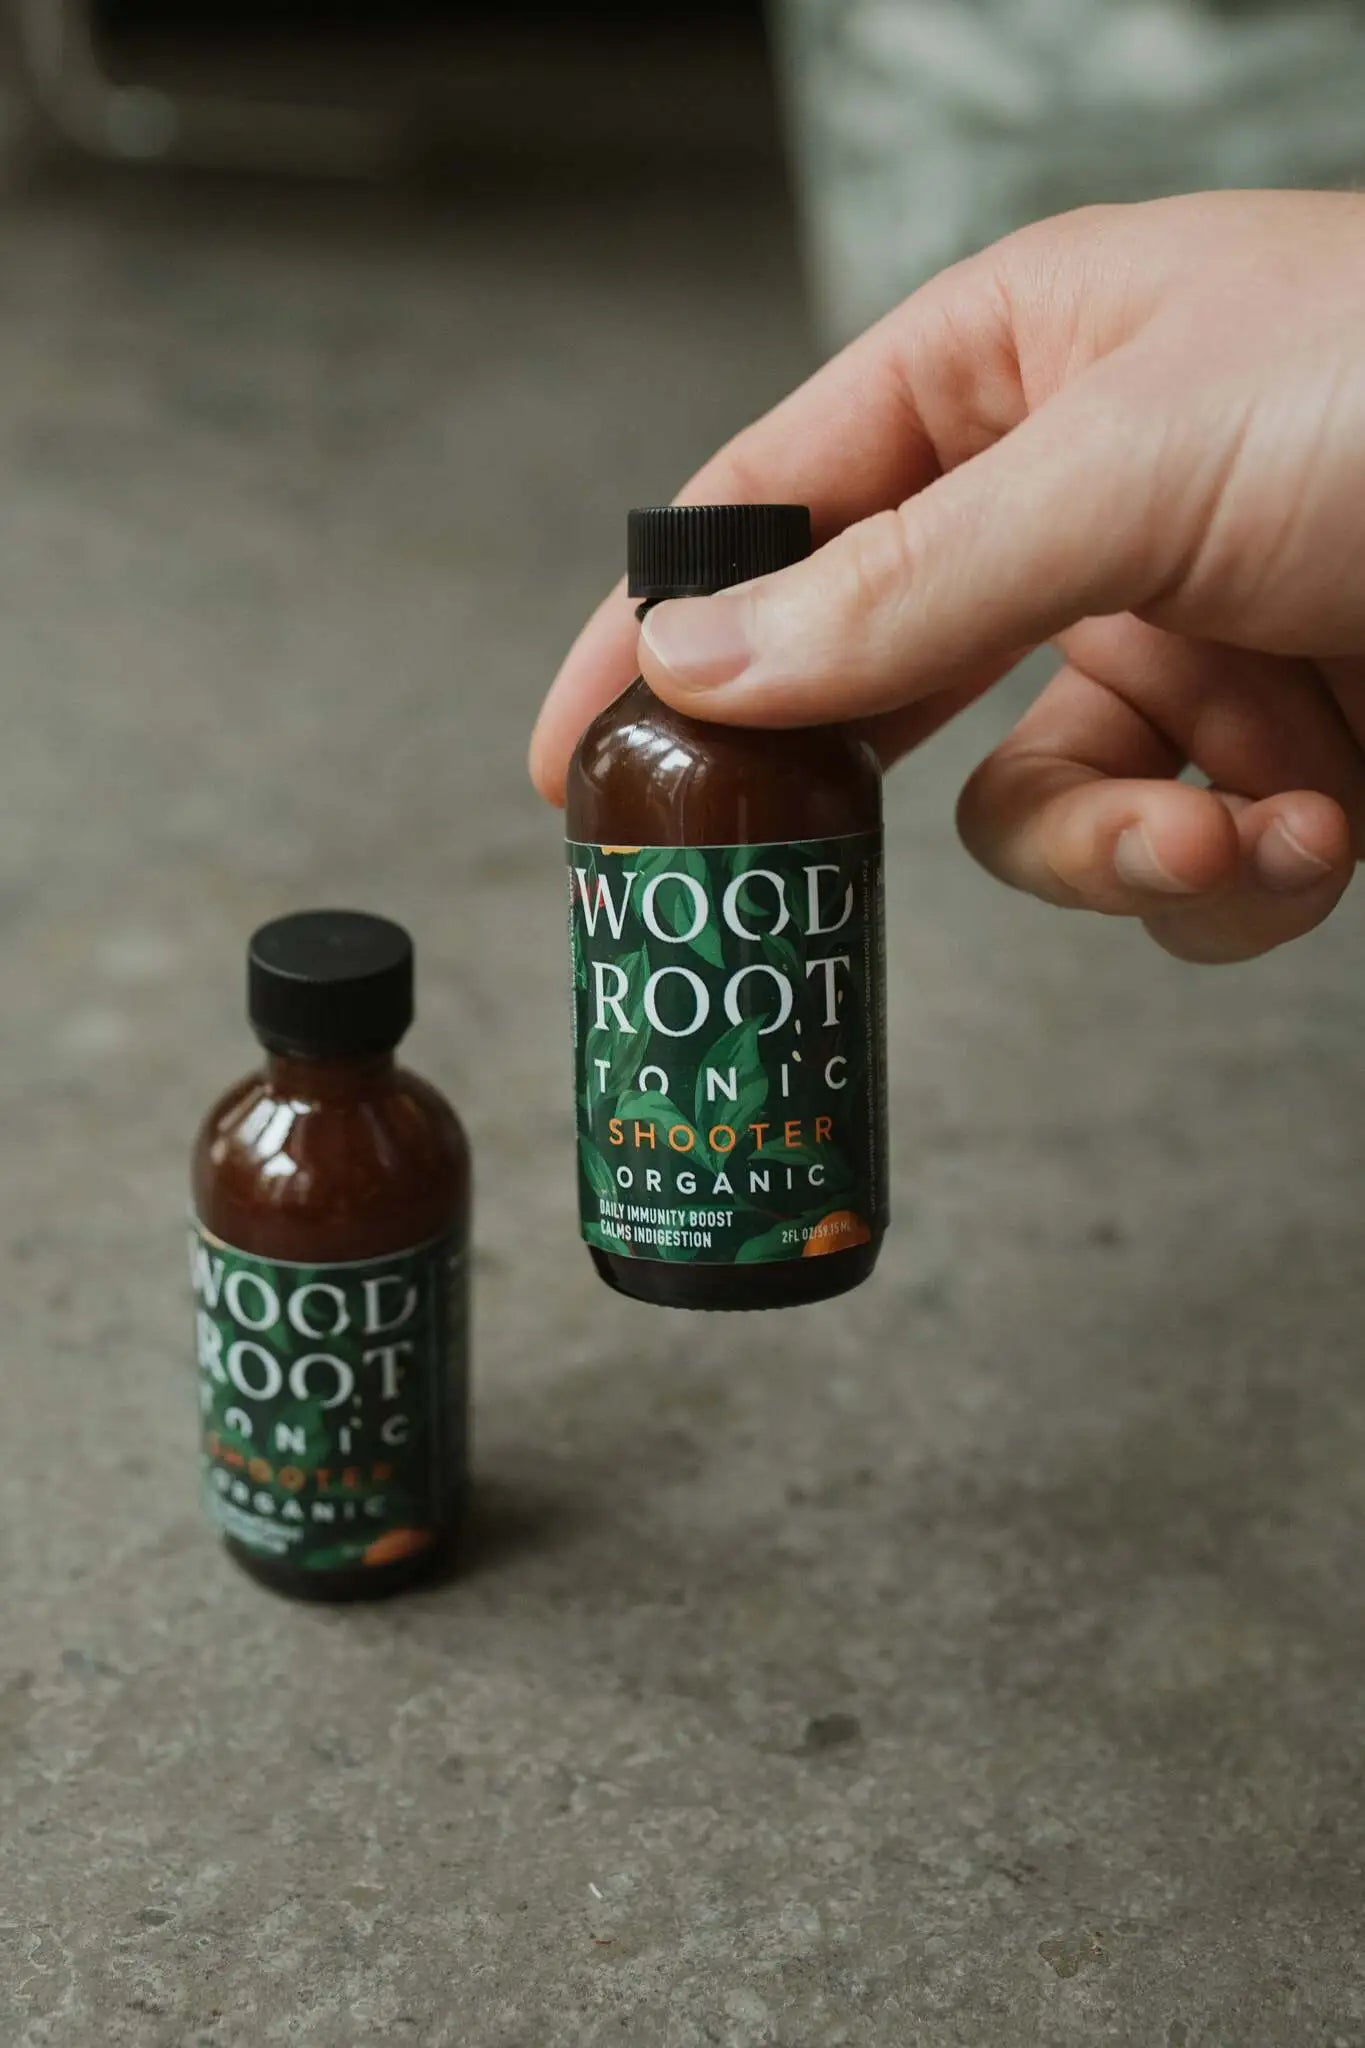 Hand picking up Woodroot Tonic single serving to-go shooter. 